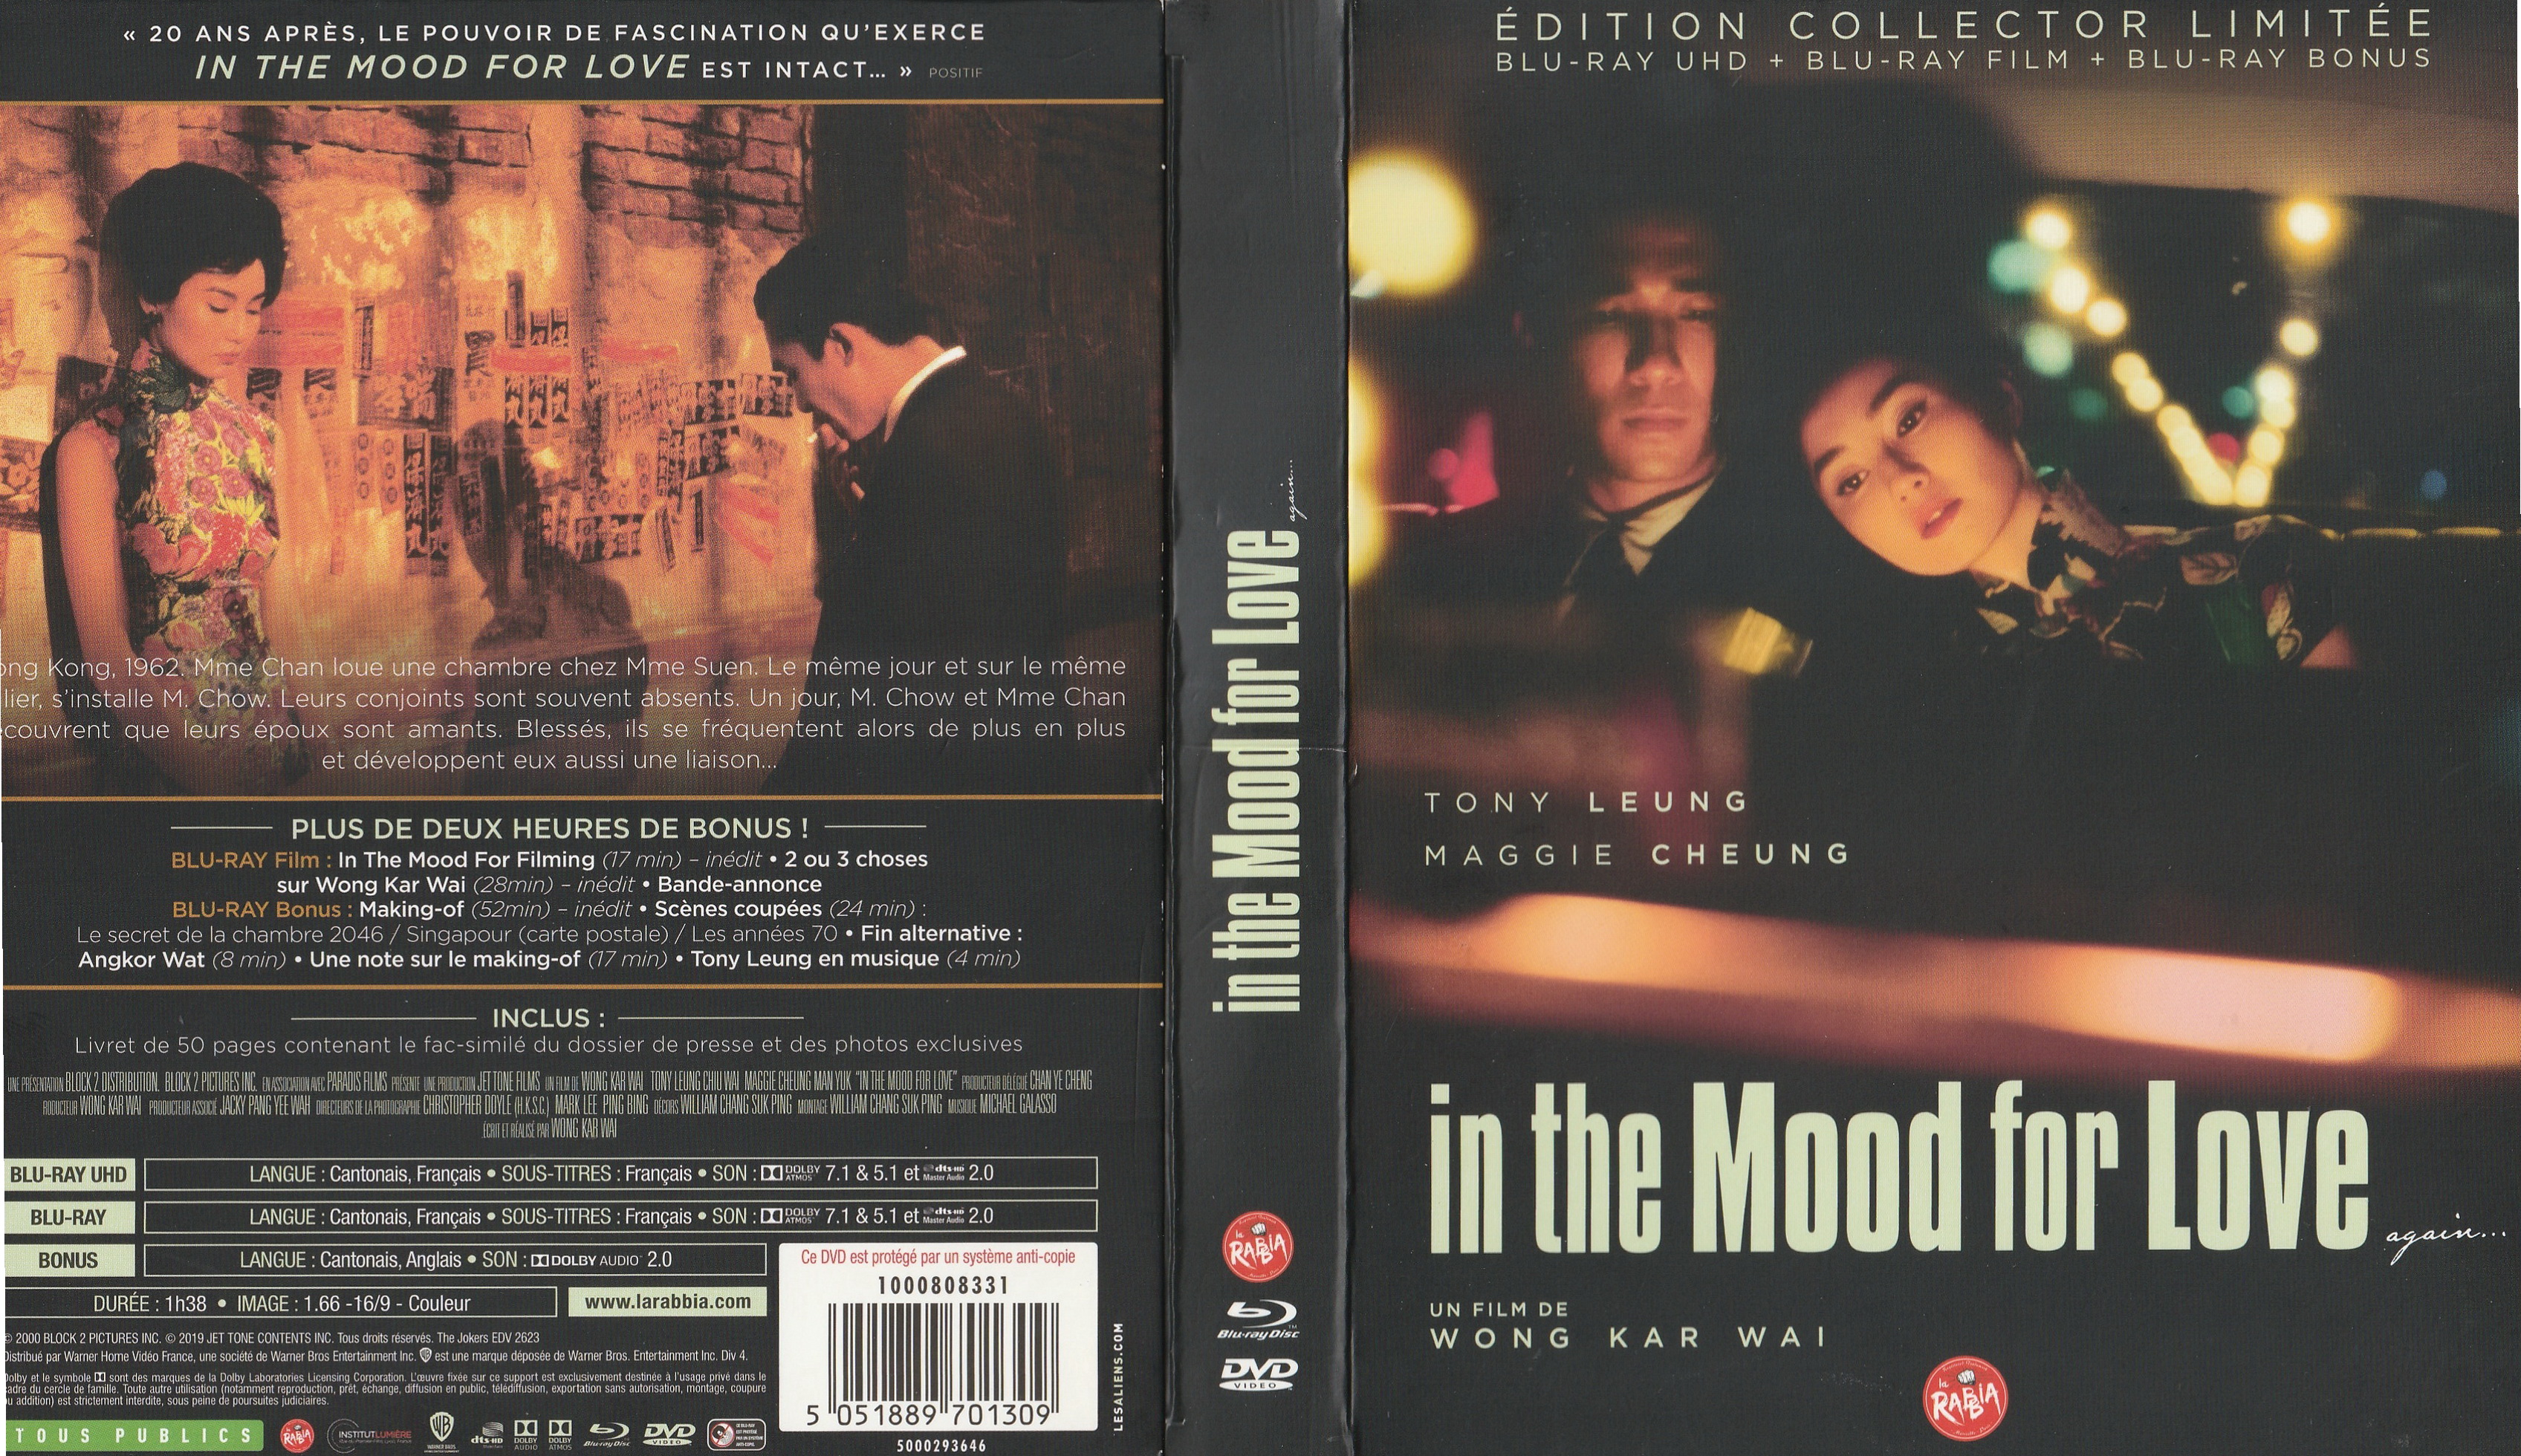 Jaquette DVD In the mood for love 4K  (BLU-RAY)